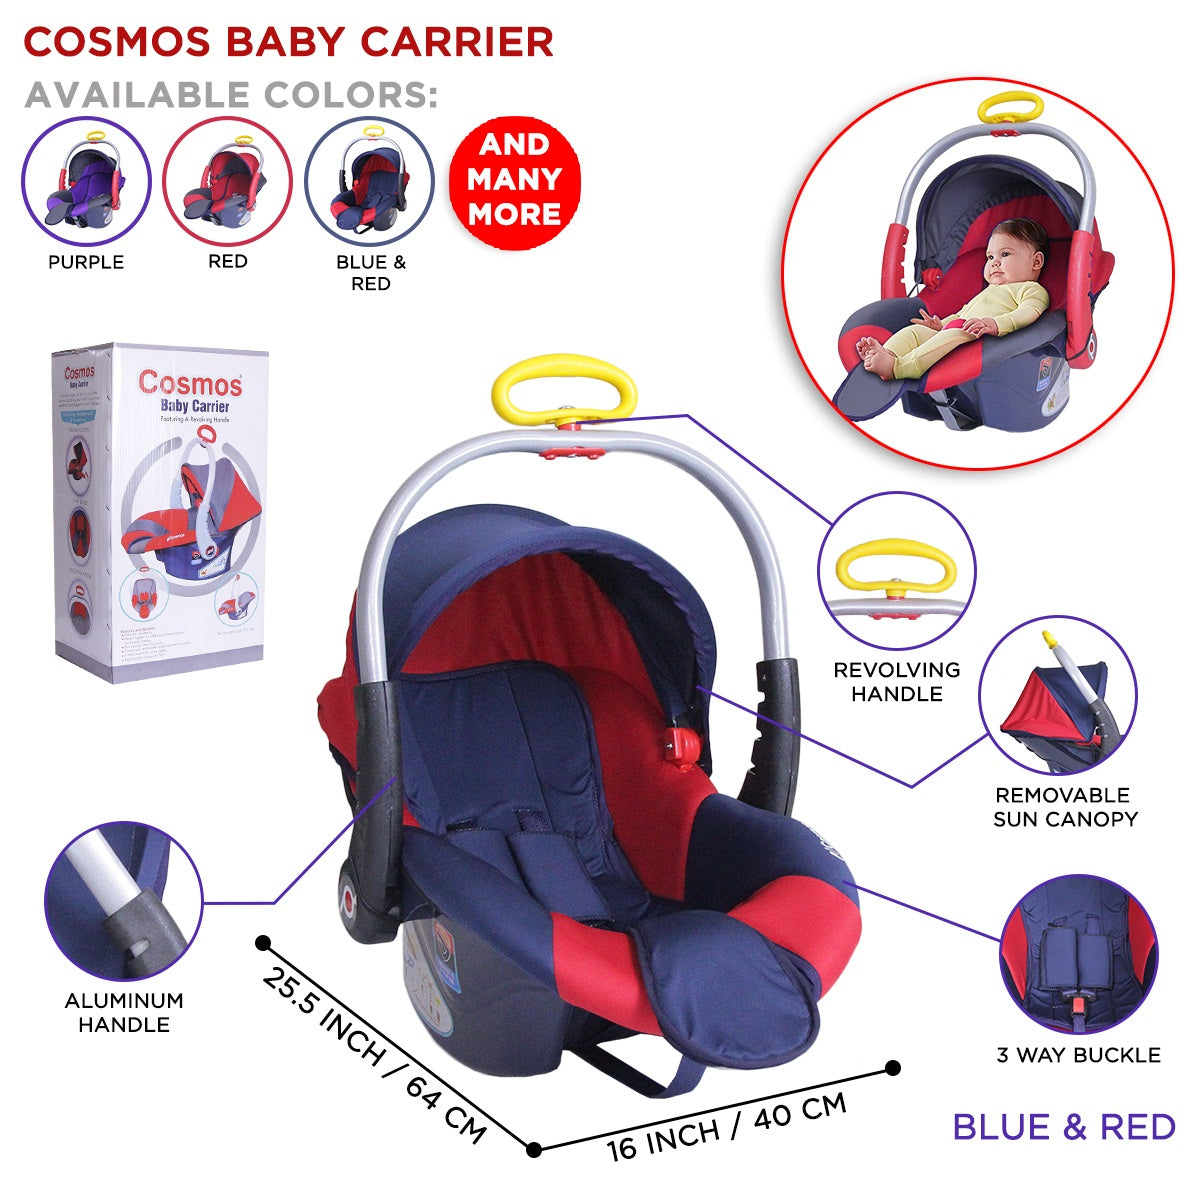 Cosmos Infant Carrier Baby & Baba Carry Cot for Kids & Toddlers - Large Size Rocker & Sleeping Seat - Adjustable Sun Canopy Mosquito Net & Revolving Aluminum Handle - New Born Children Carry Coat Rest Seats - Luxurious Padding & Head Hugger For Smaller Ba